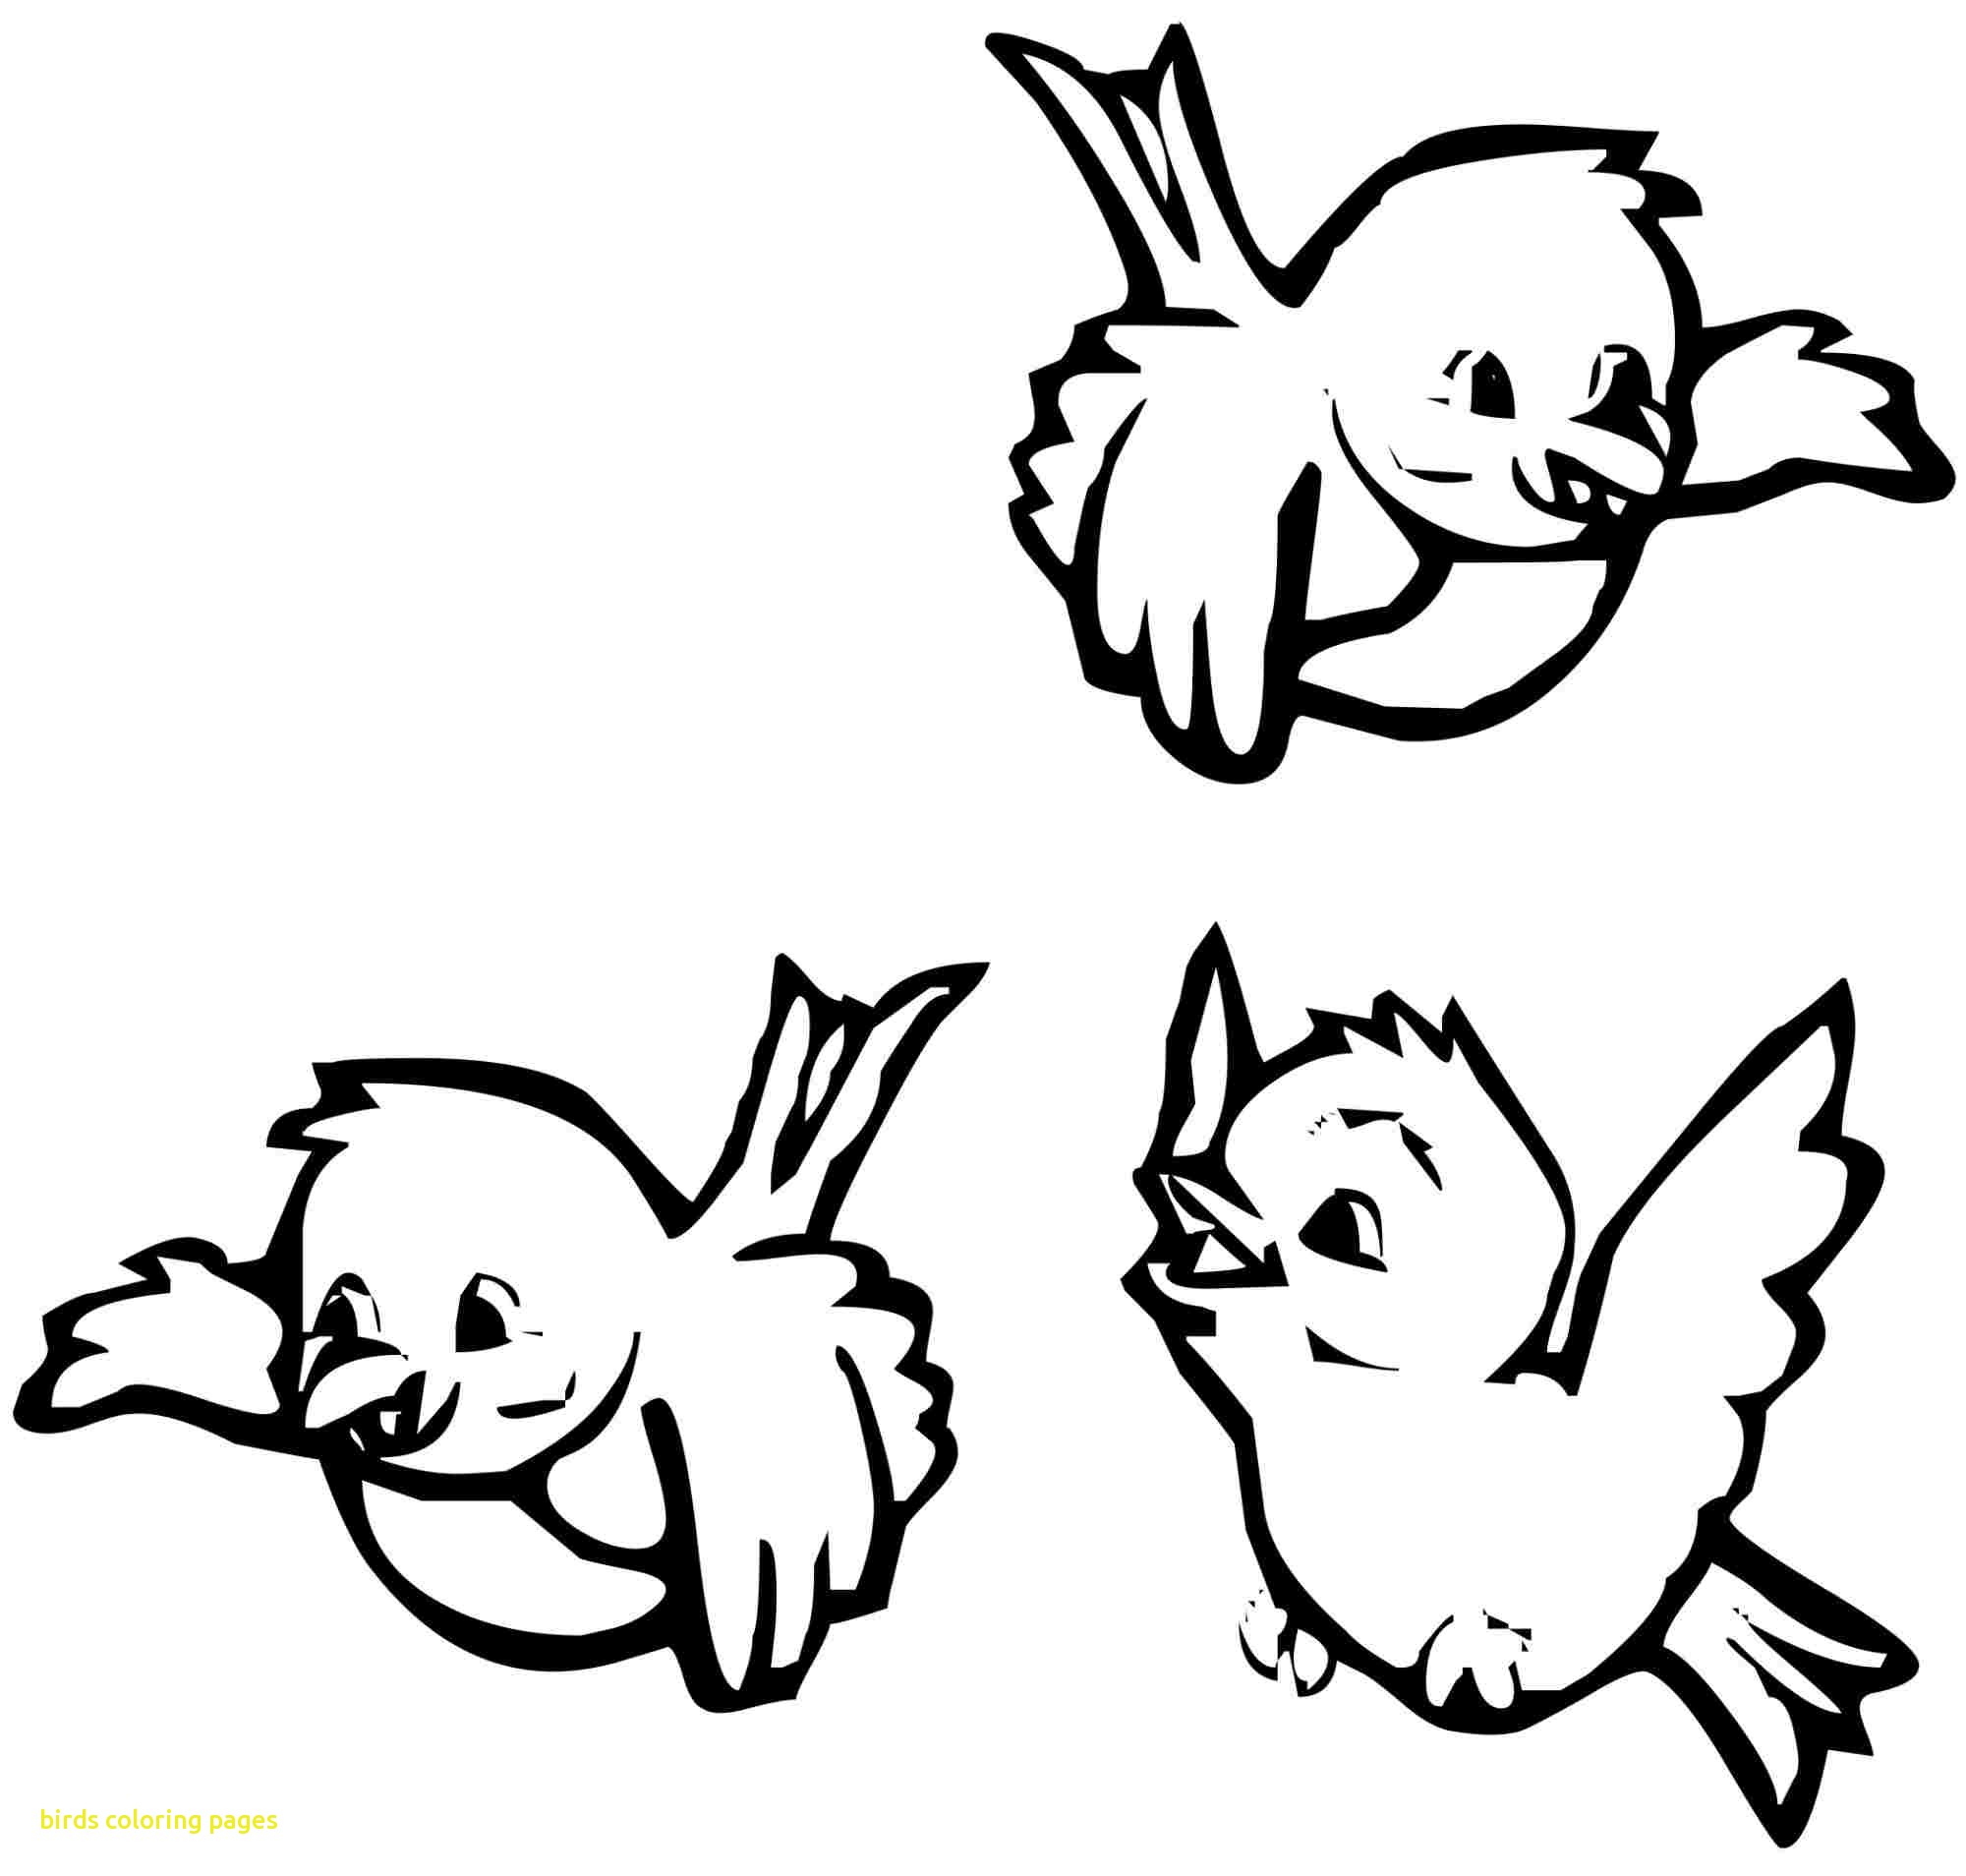 213 Cartoon Birds In Winter Coloring Pages with disney character